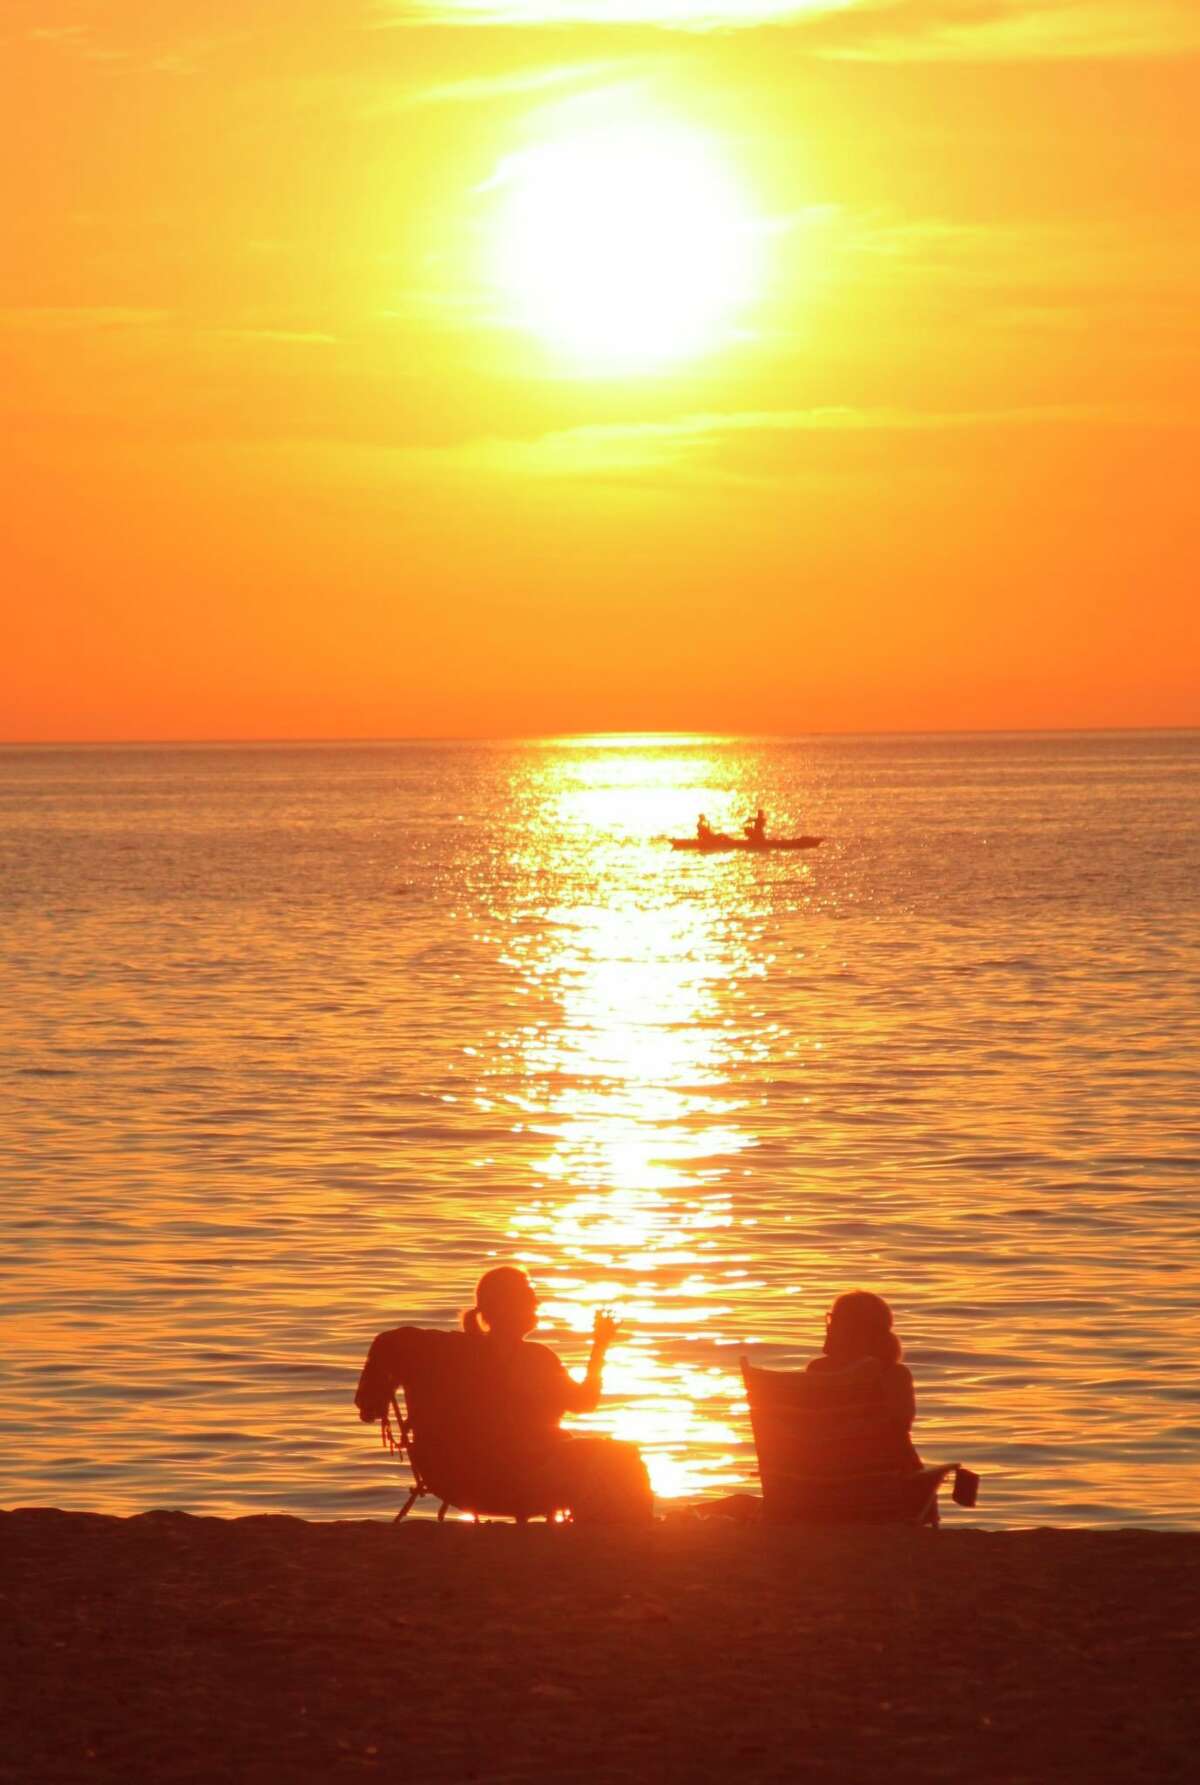 Taking in a sunset on the shores of Lake Michigan is a wonderful way to punctuate a summer night. (File photo)